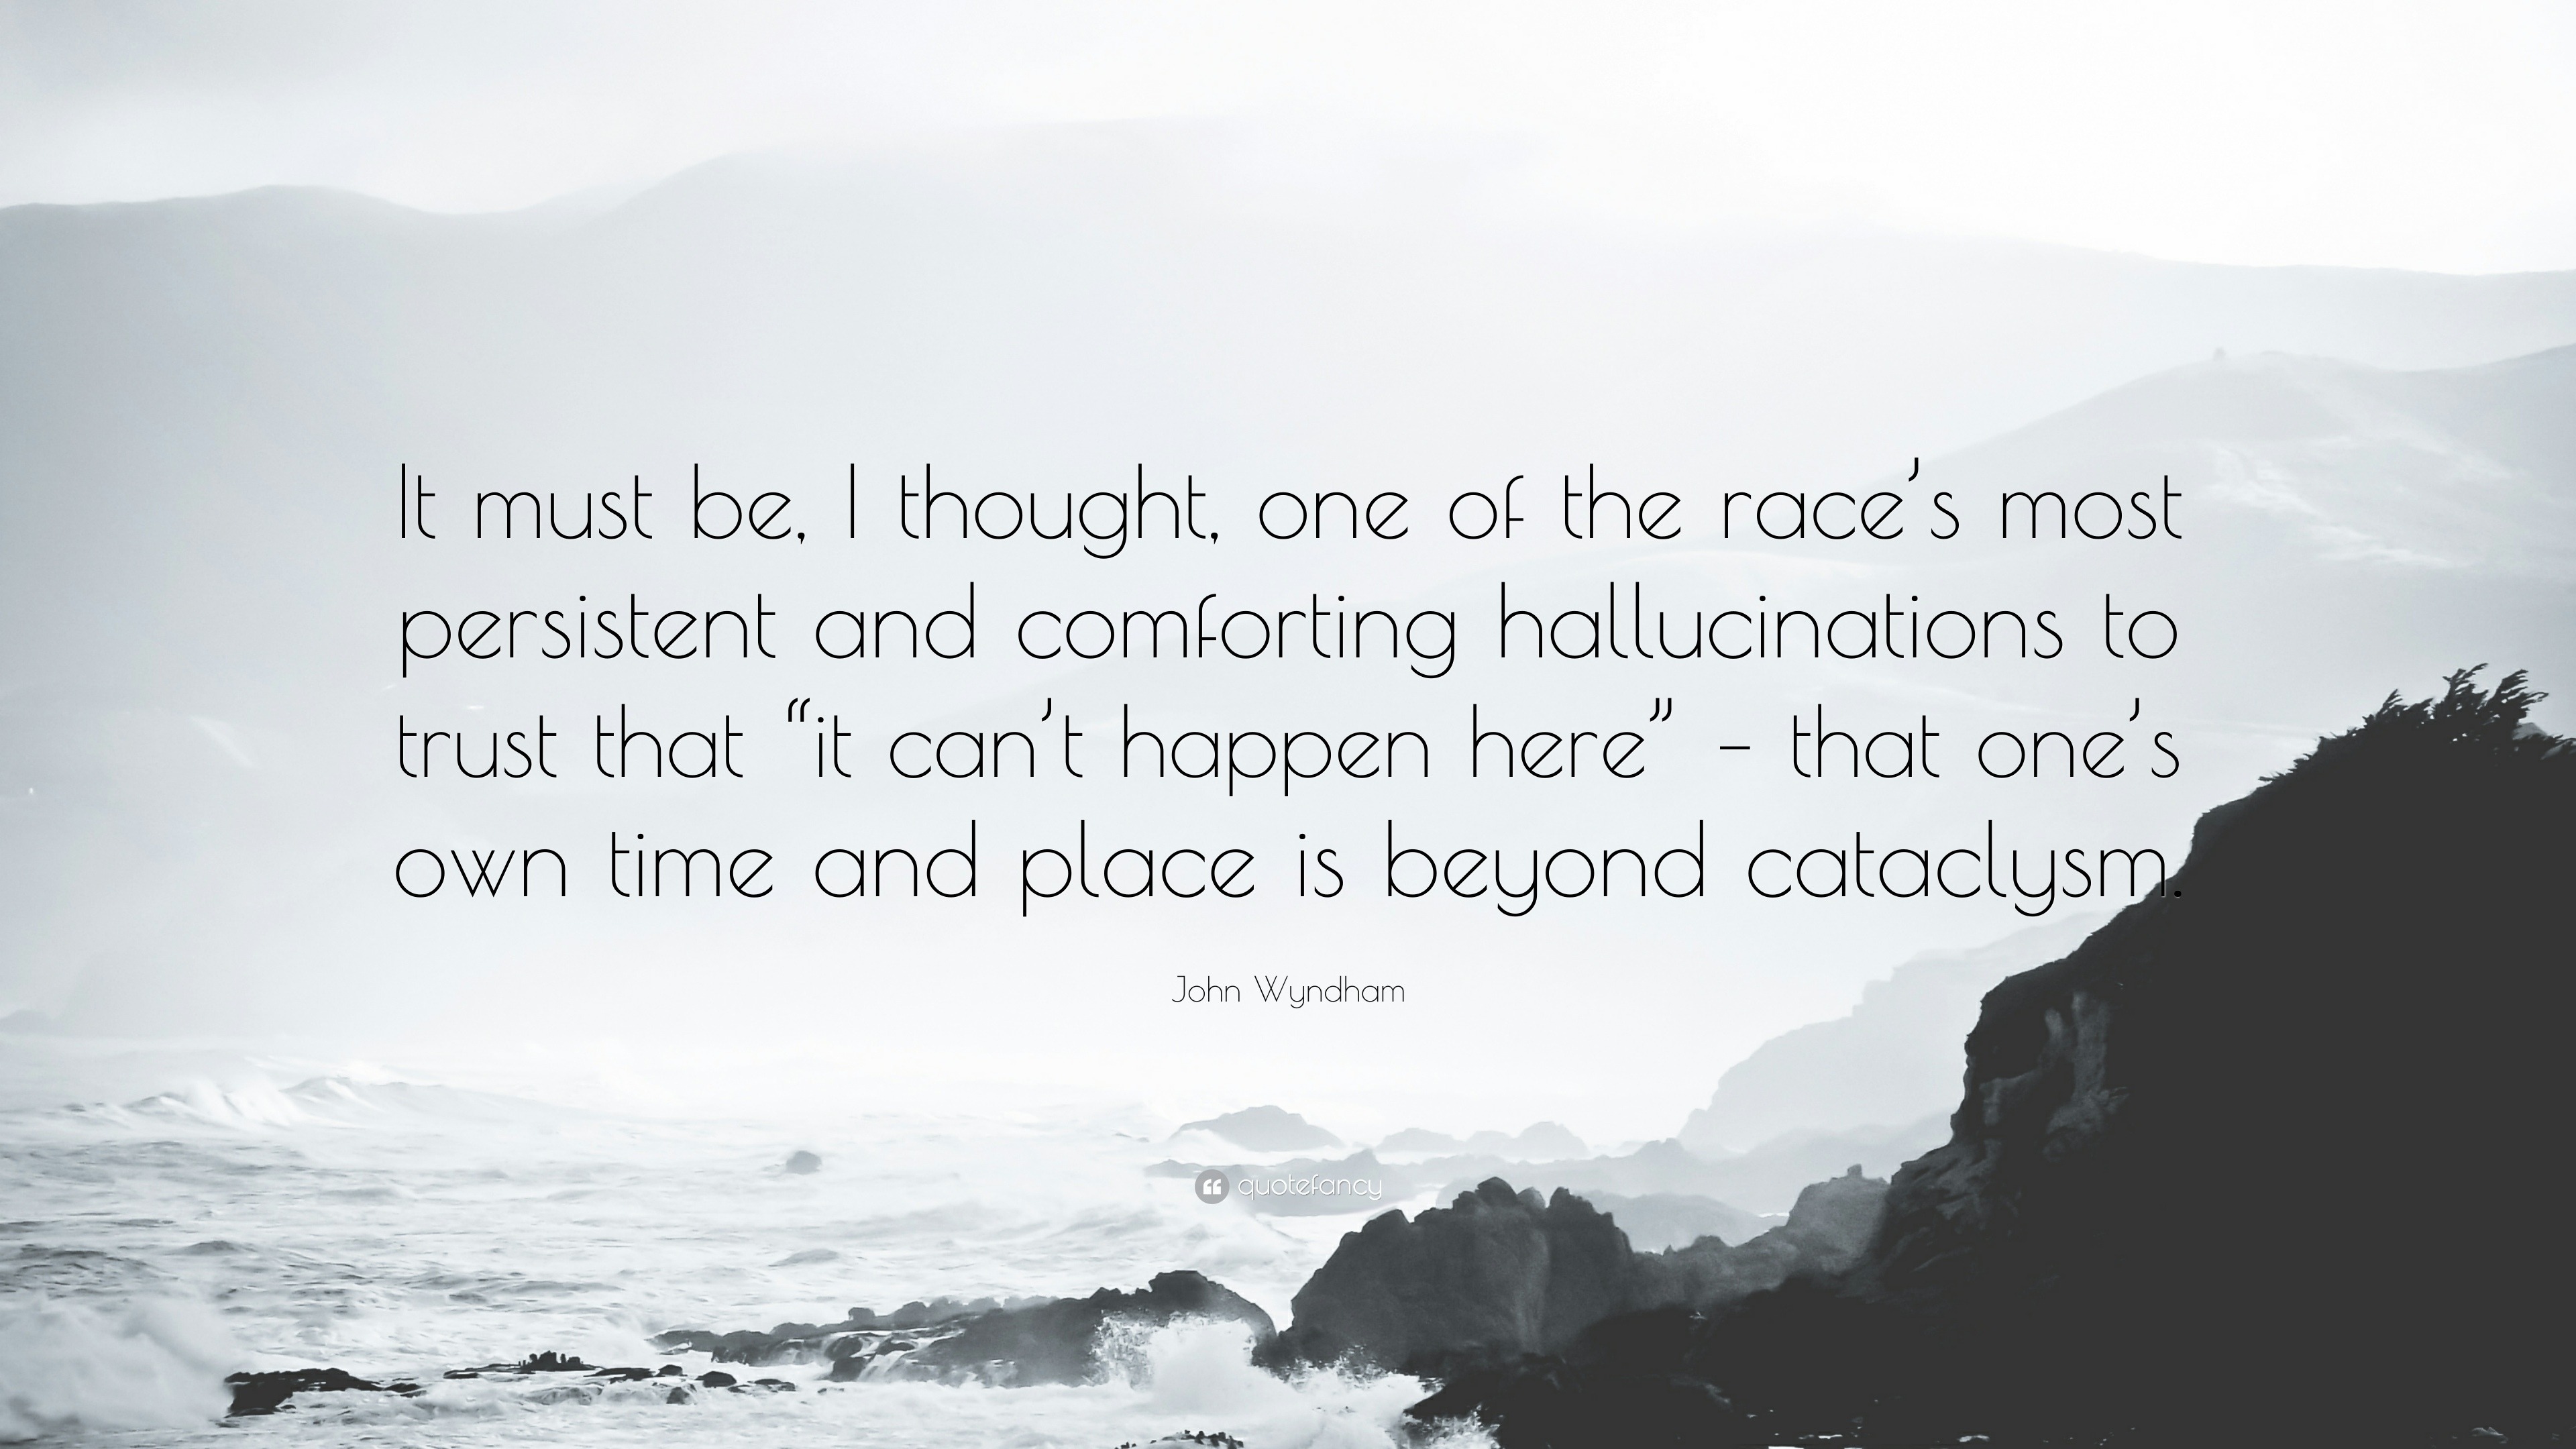 John Wyndham Quote: “It must be, I thought, one of the race’s most ...